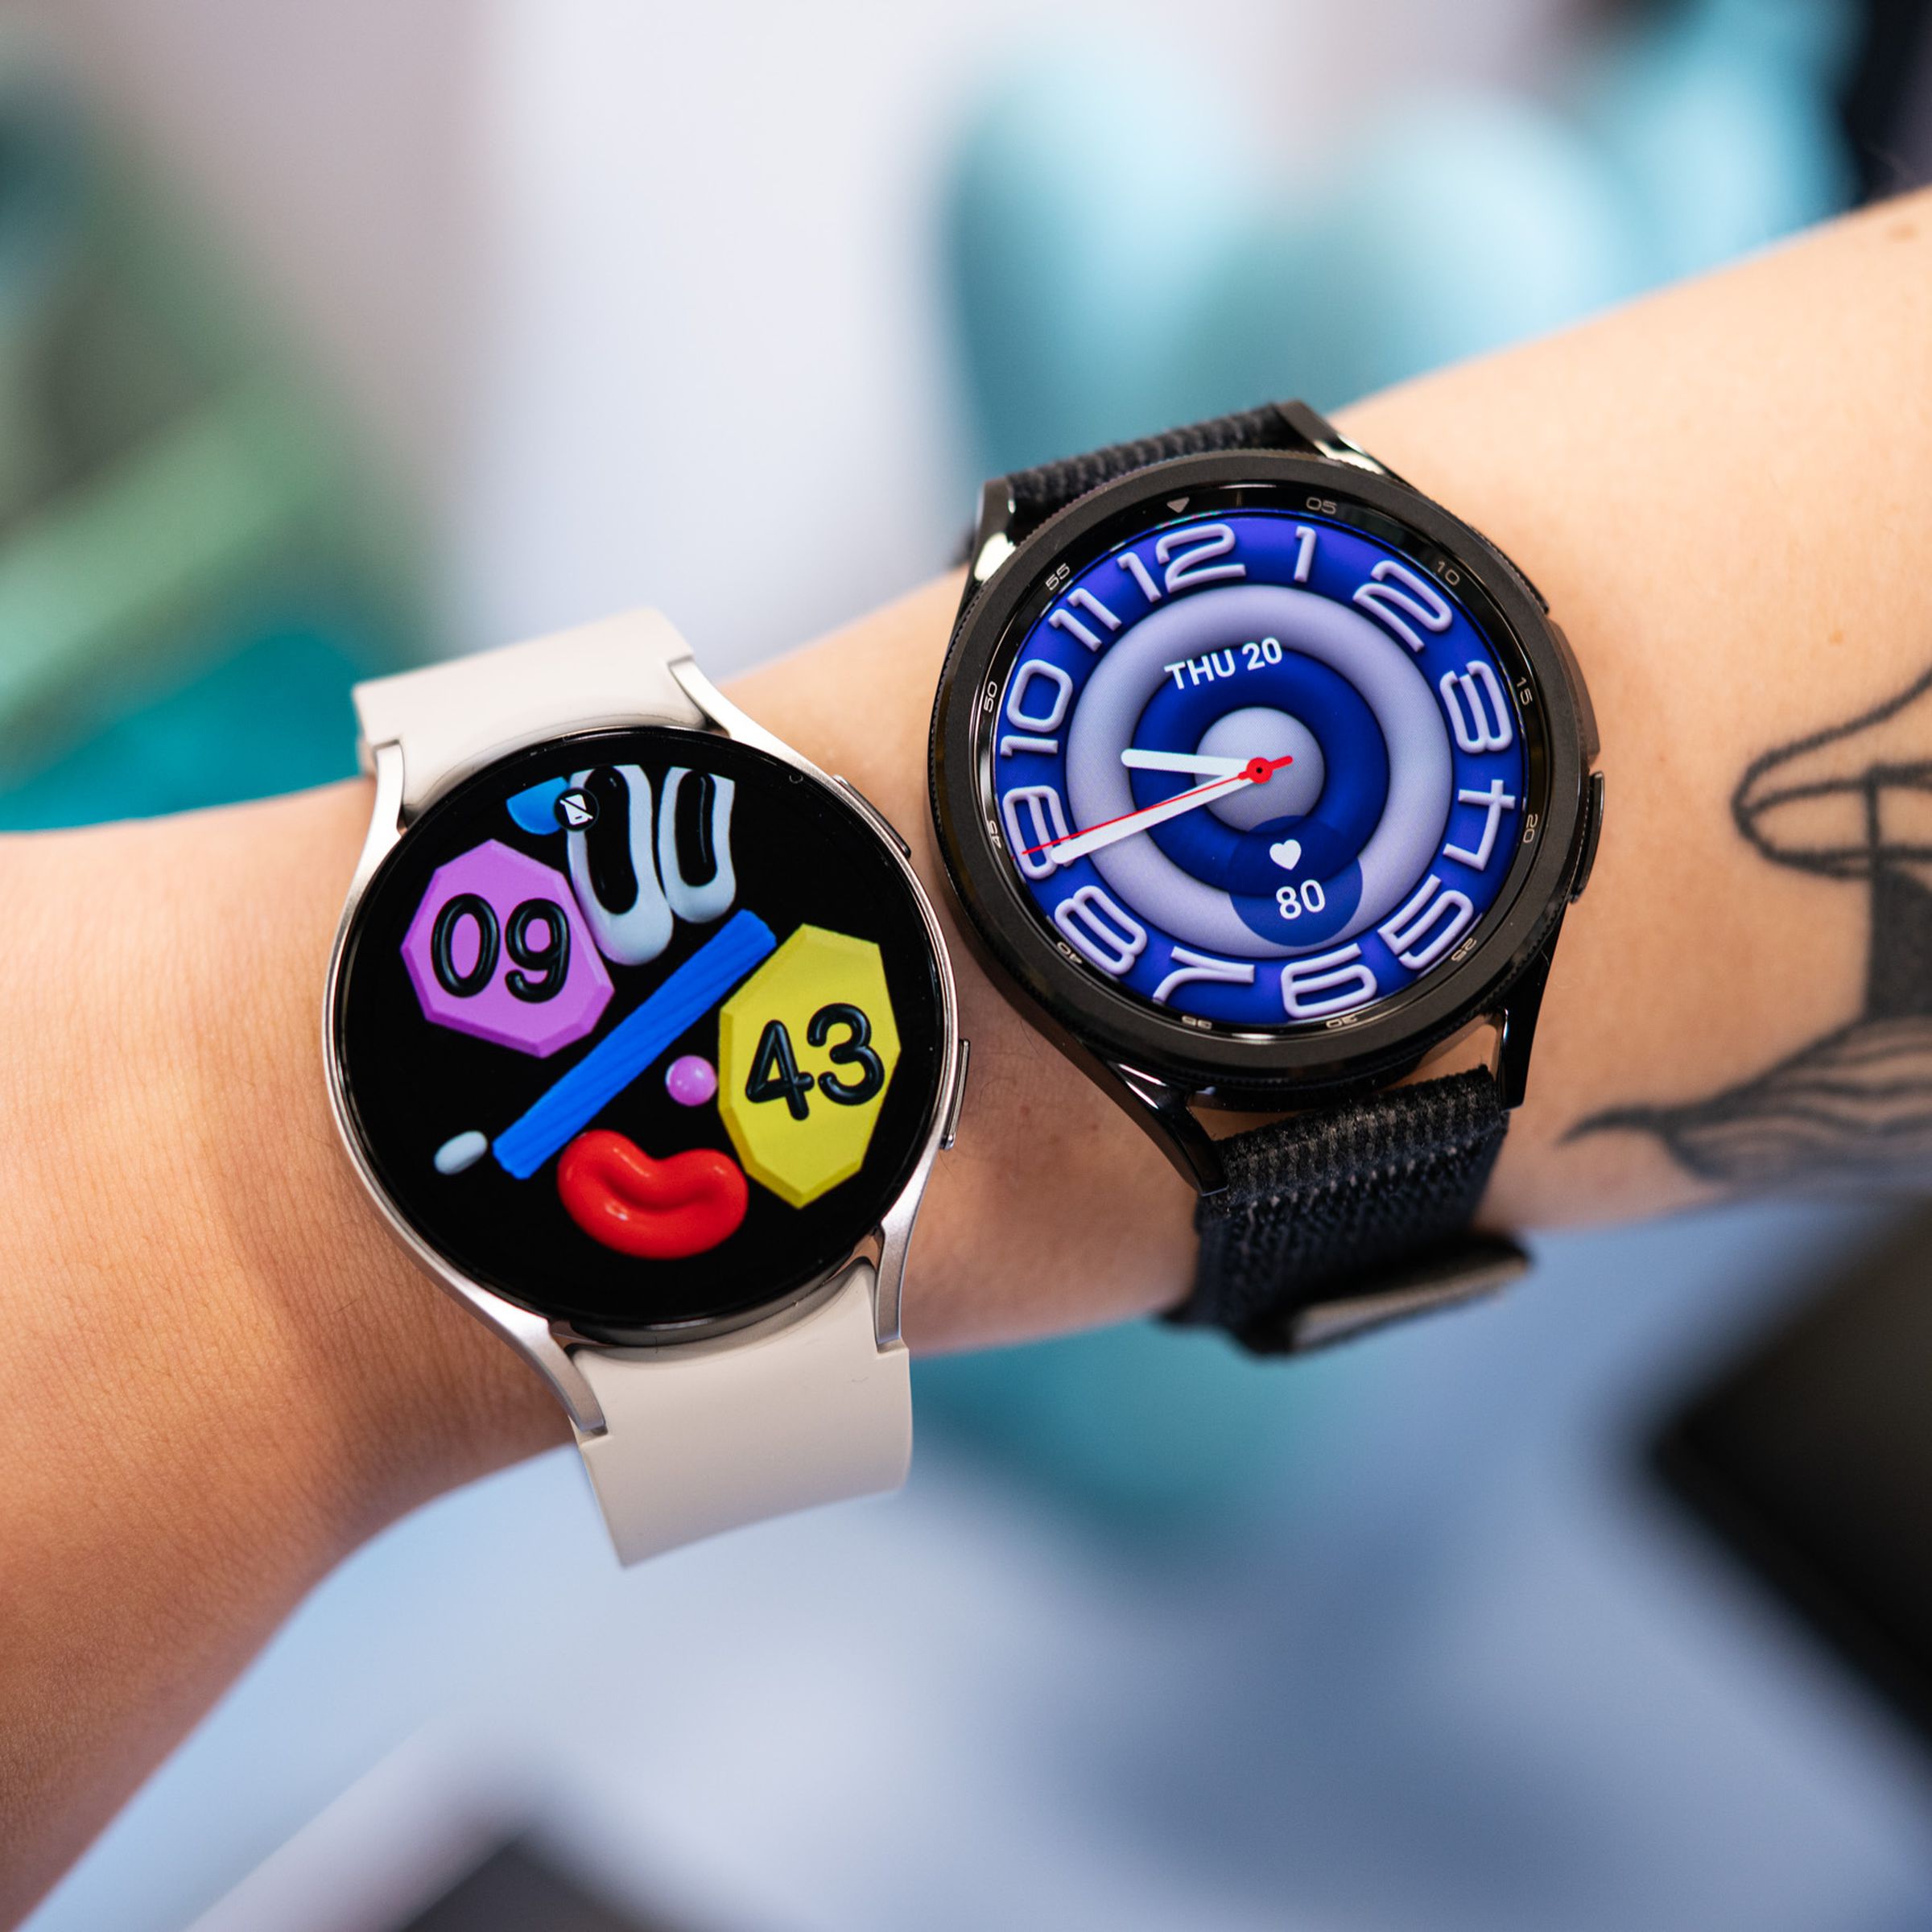 44mm Galaxy Watch 6 next to the 47mm Galaxy Watch 6 Classic on the same wrist